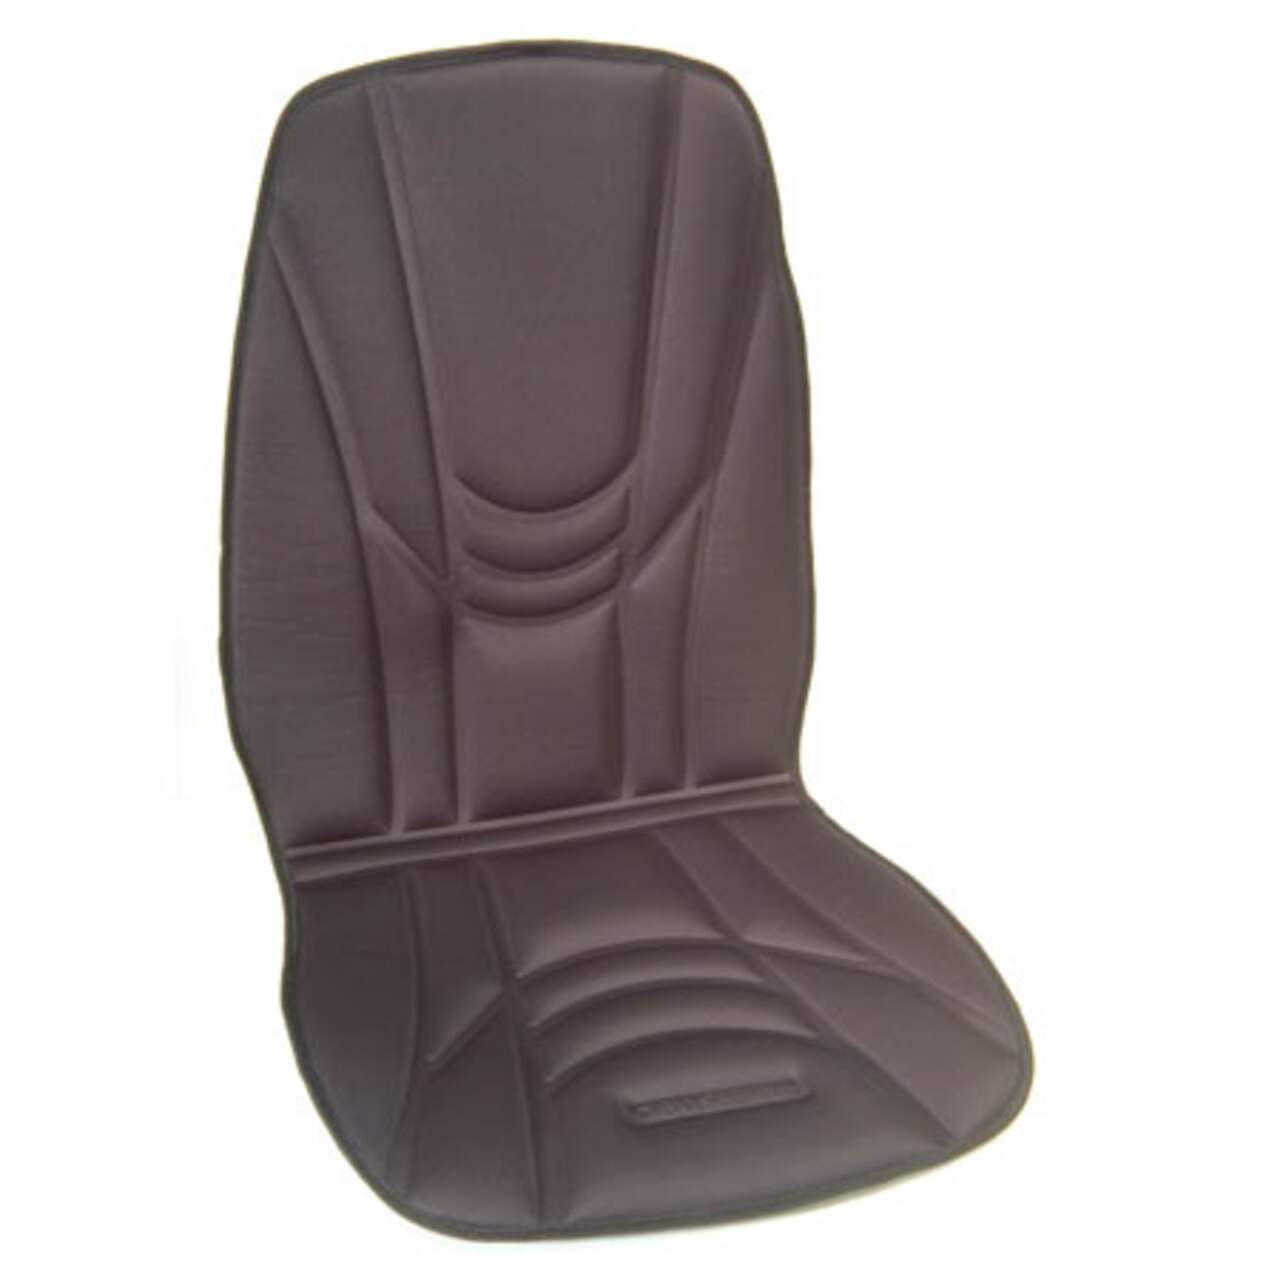 https://media-www.canadiantire.ca/product/automotive/car-care-accessories/auto-comfort/0321478/obus-forme-seat-pad-21-black-22b6854b-6ae1-430d-8549-5698ac9733ce.png?imdensity=1&imwidth=640&impolicy=mZoom